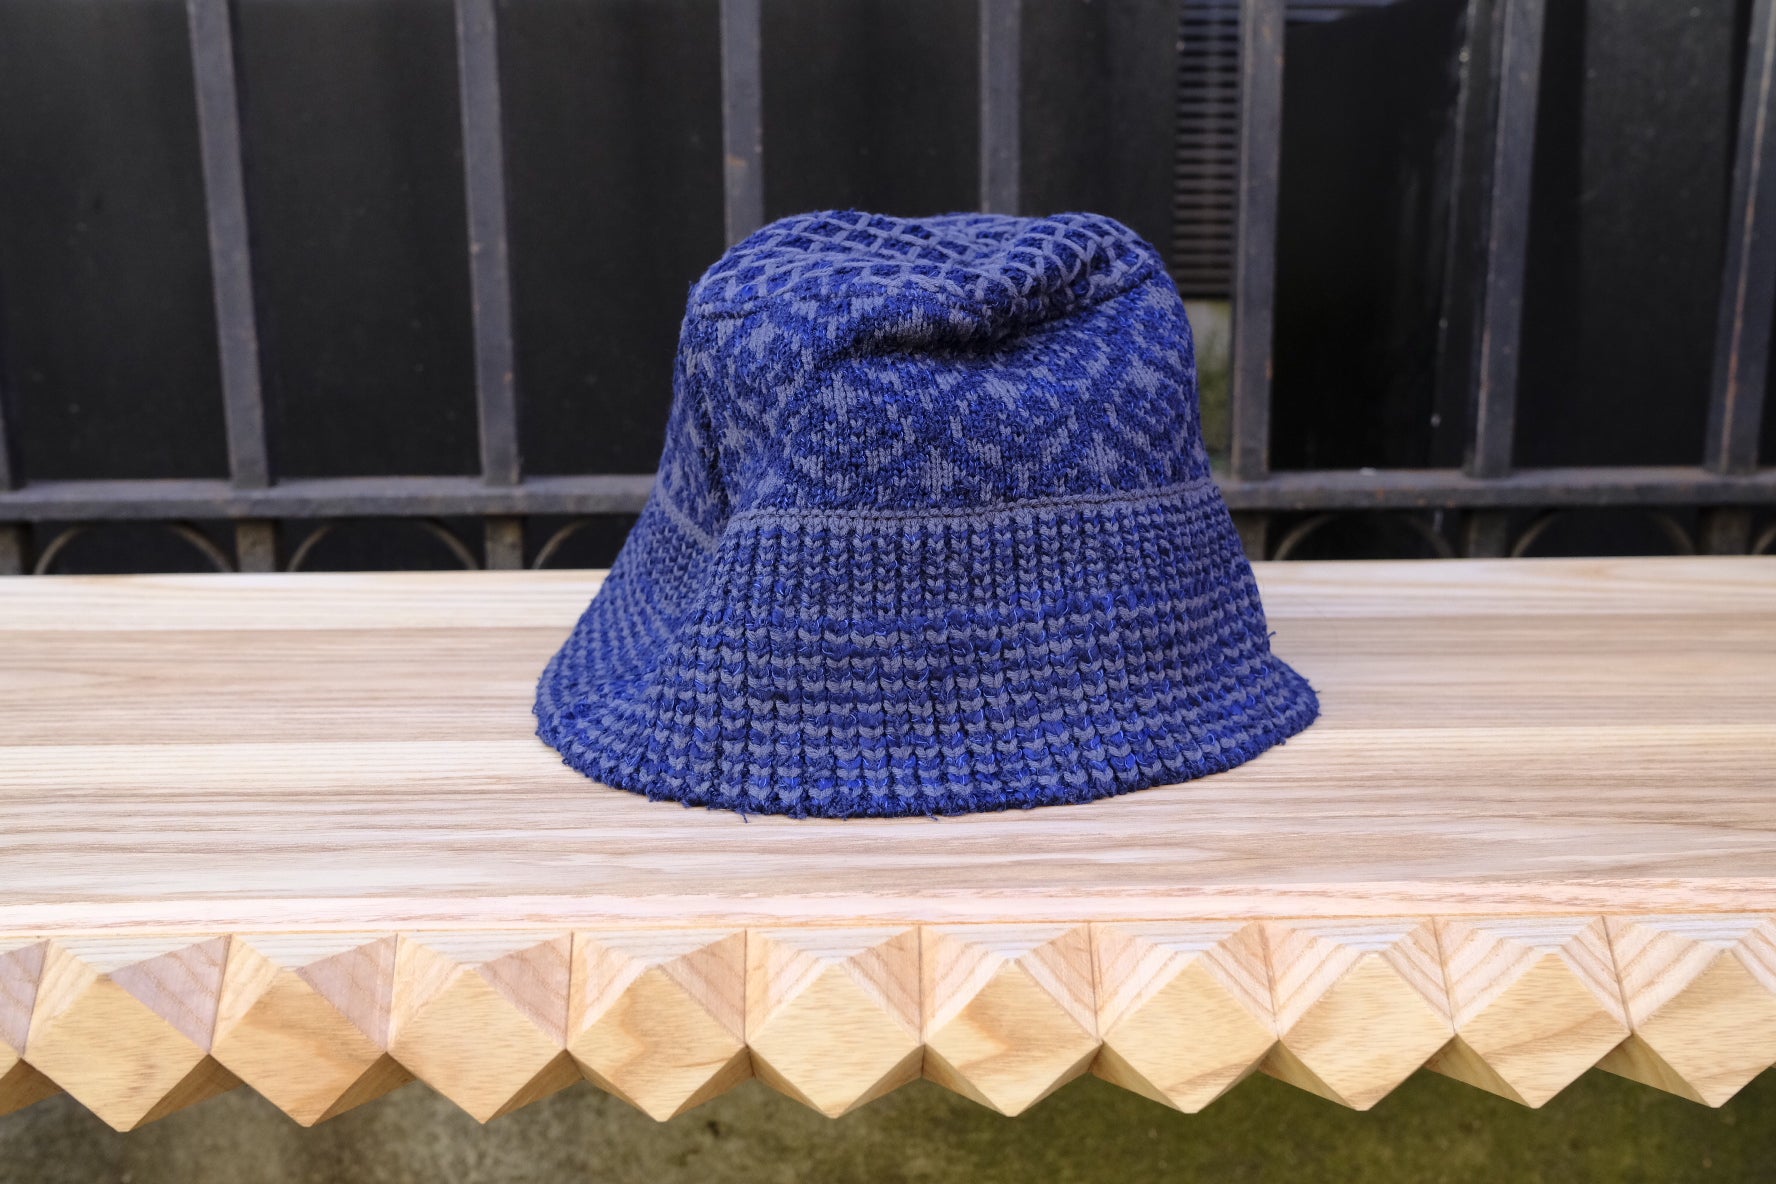 jacquard knit hat in navy